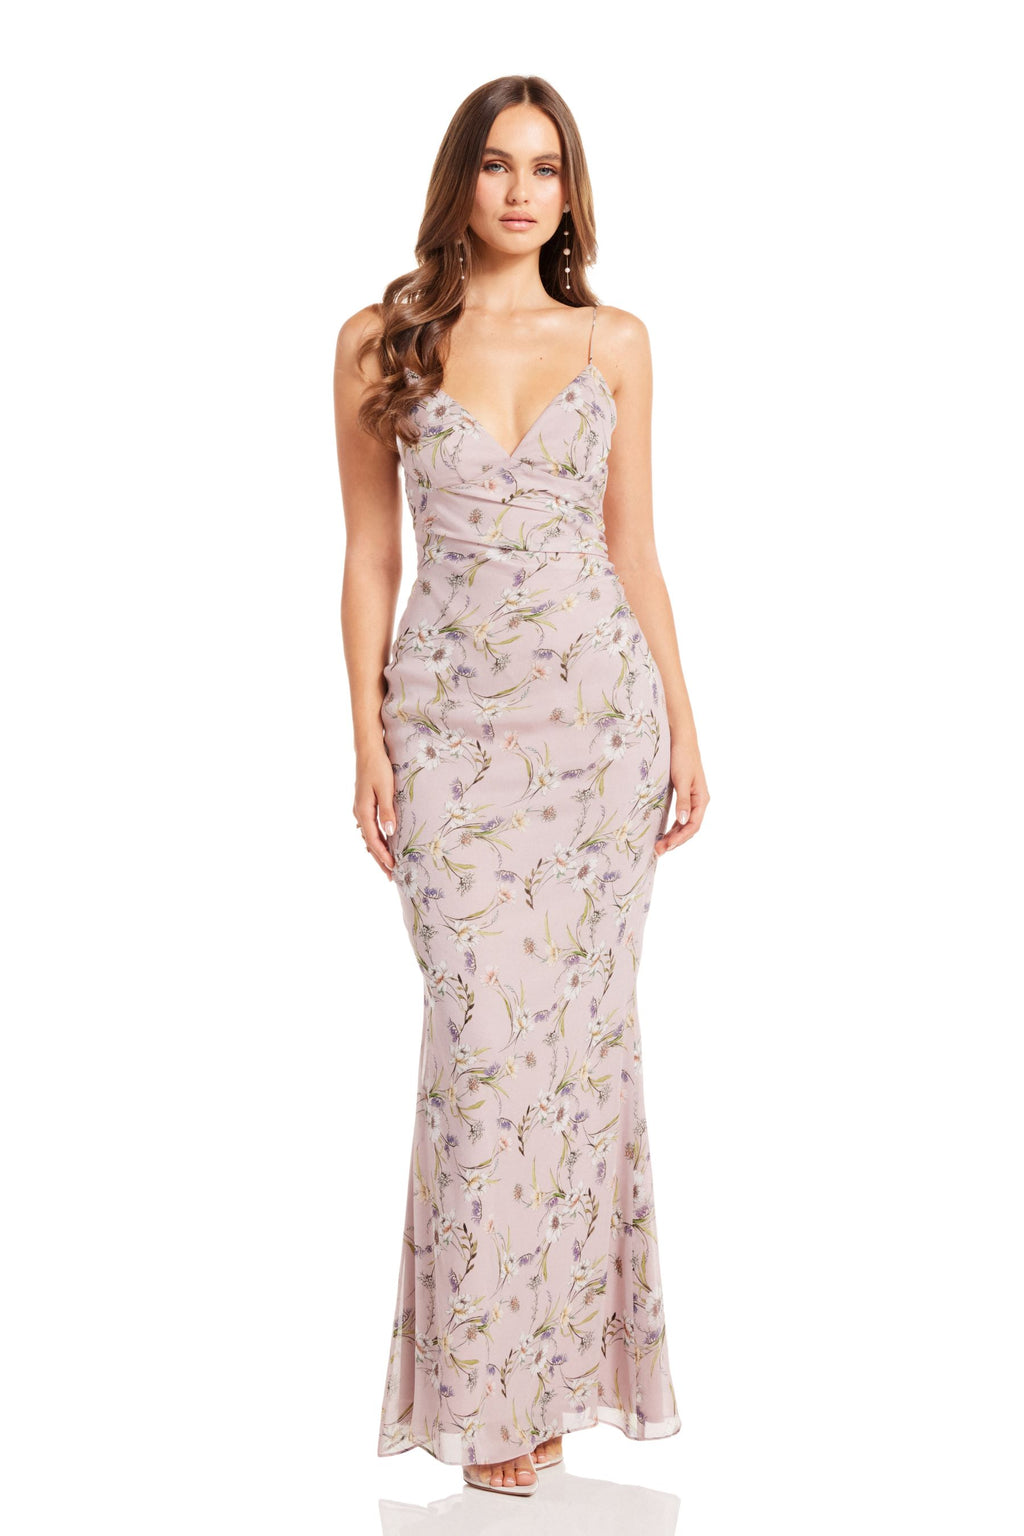 KARLEE GOWN - DUSTY PINK - Daniela's Boutique